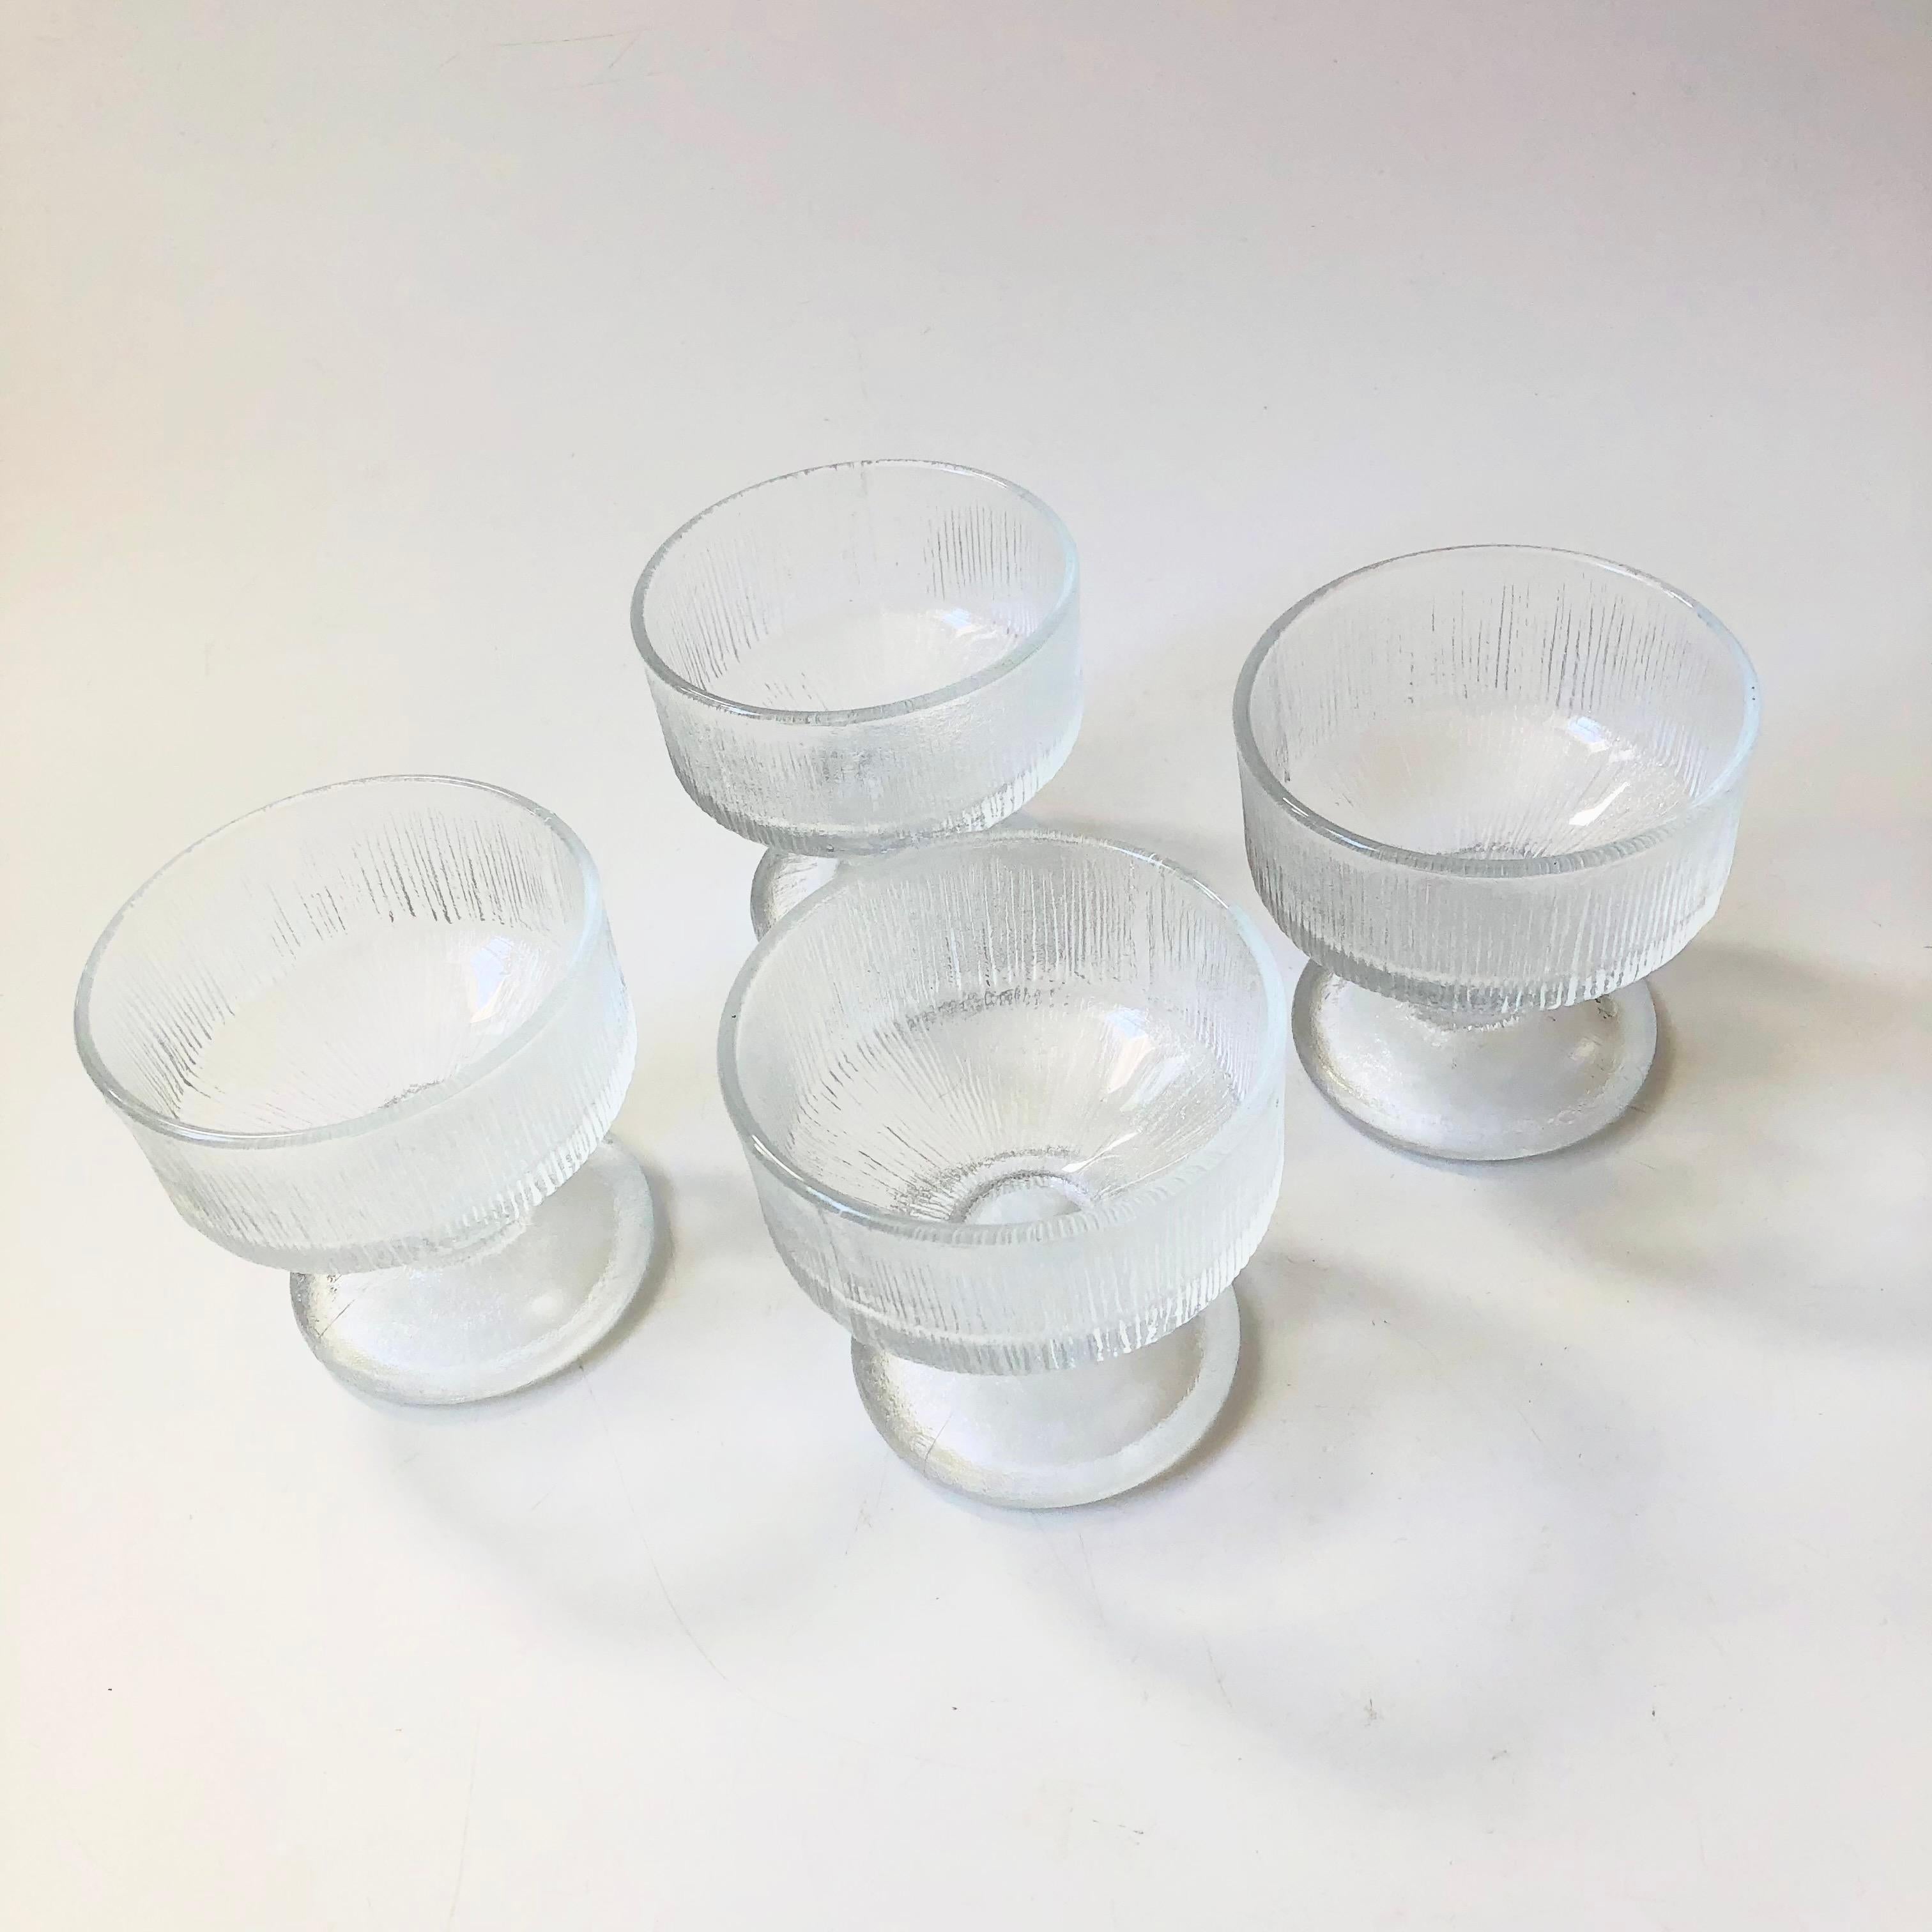 A set of 4 mid century glass coupes. Each has an elegant shape with a beautiful icey texture to the glass. Perfect for champagne or cocktails.

